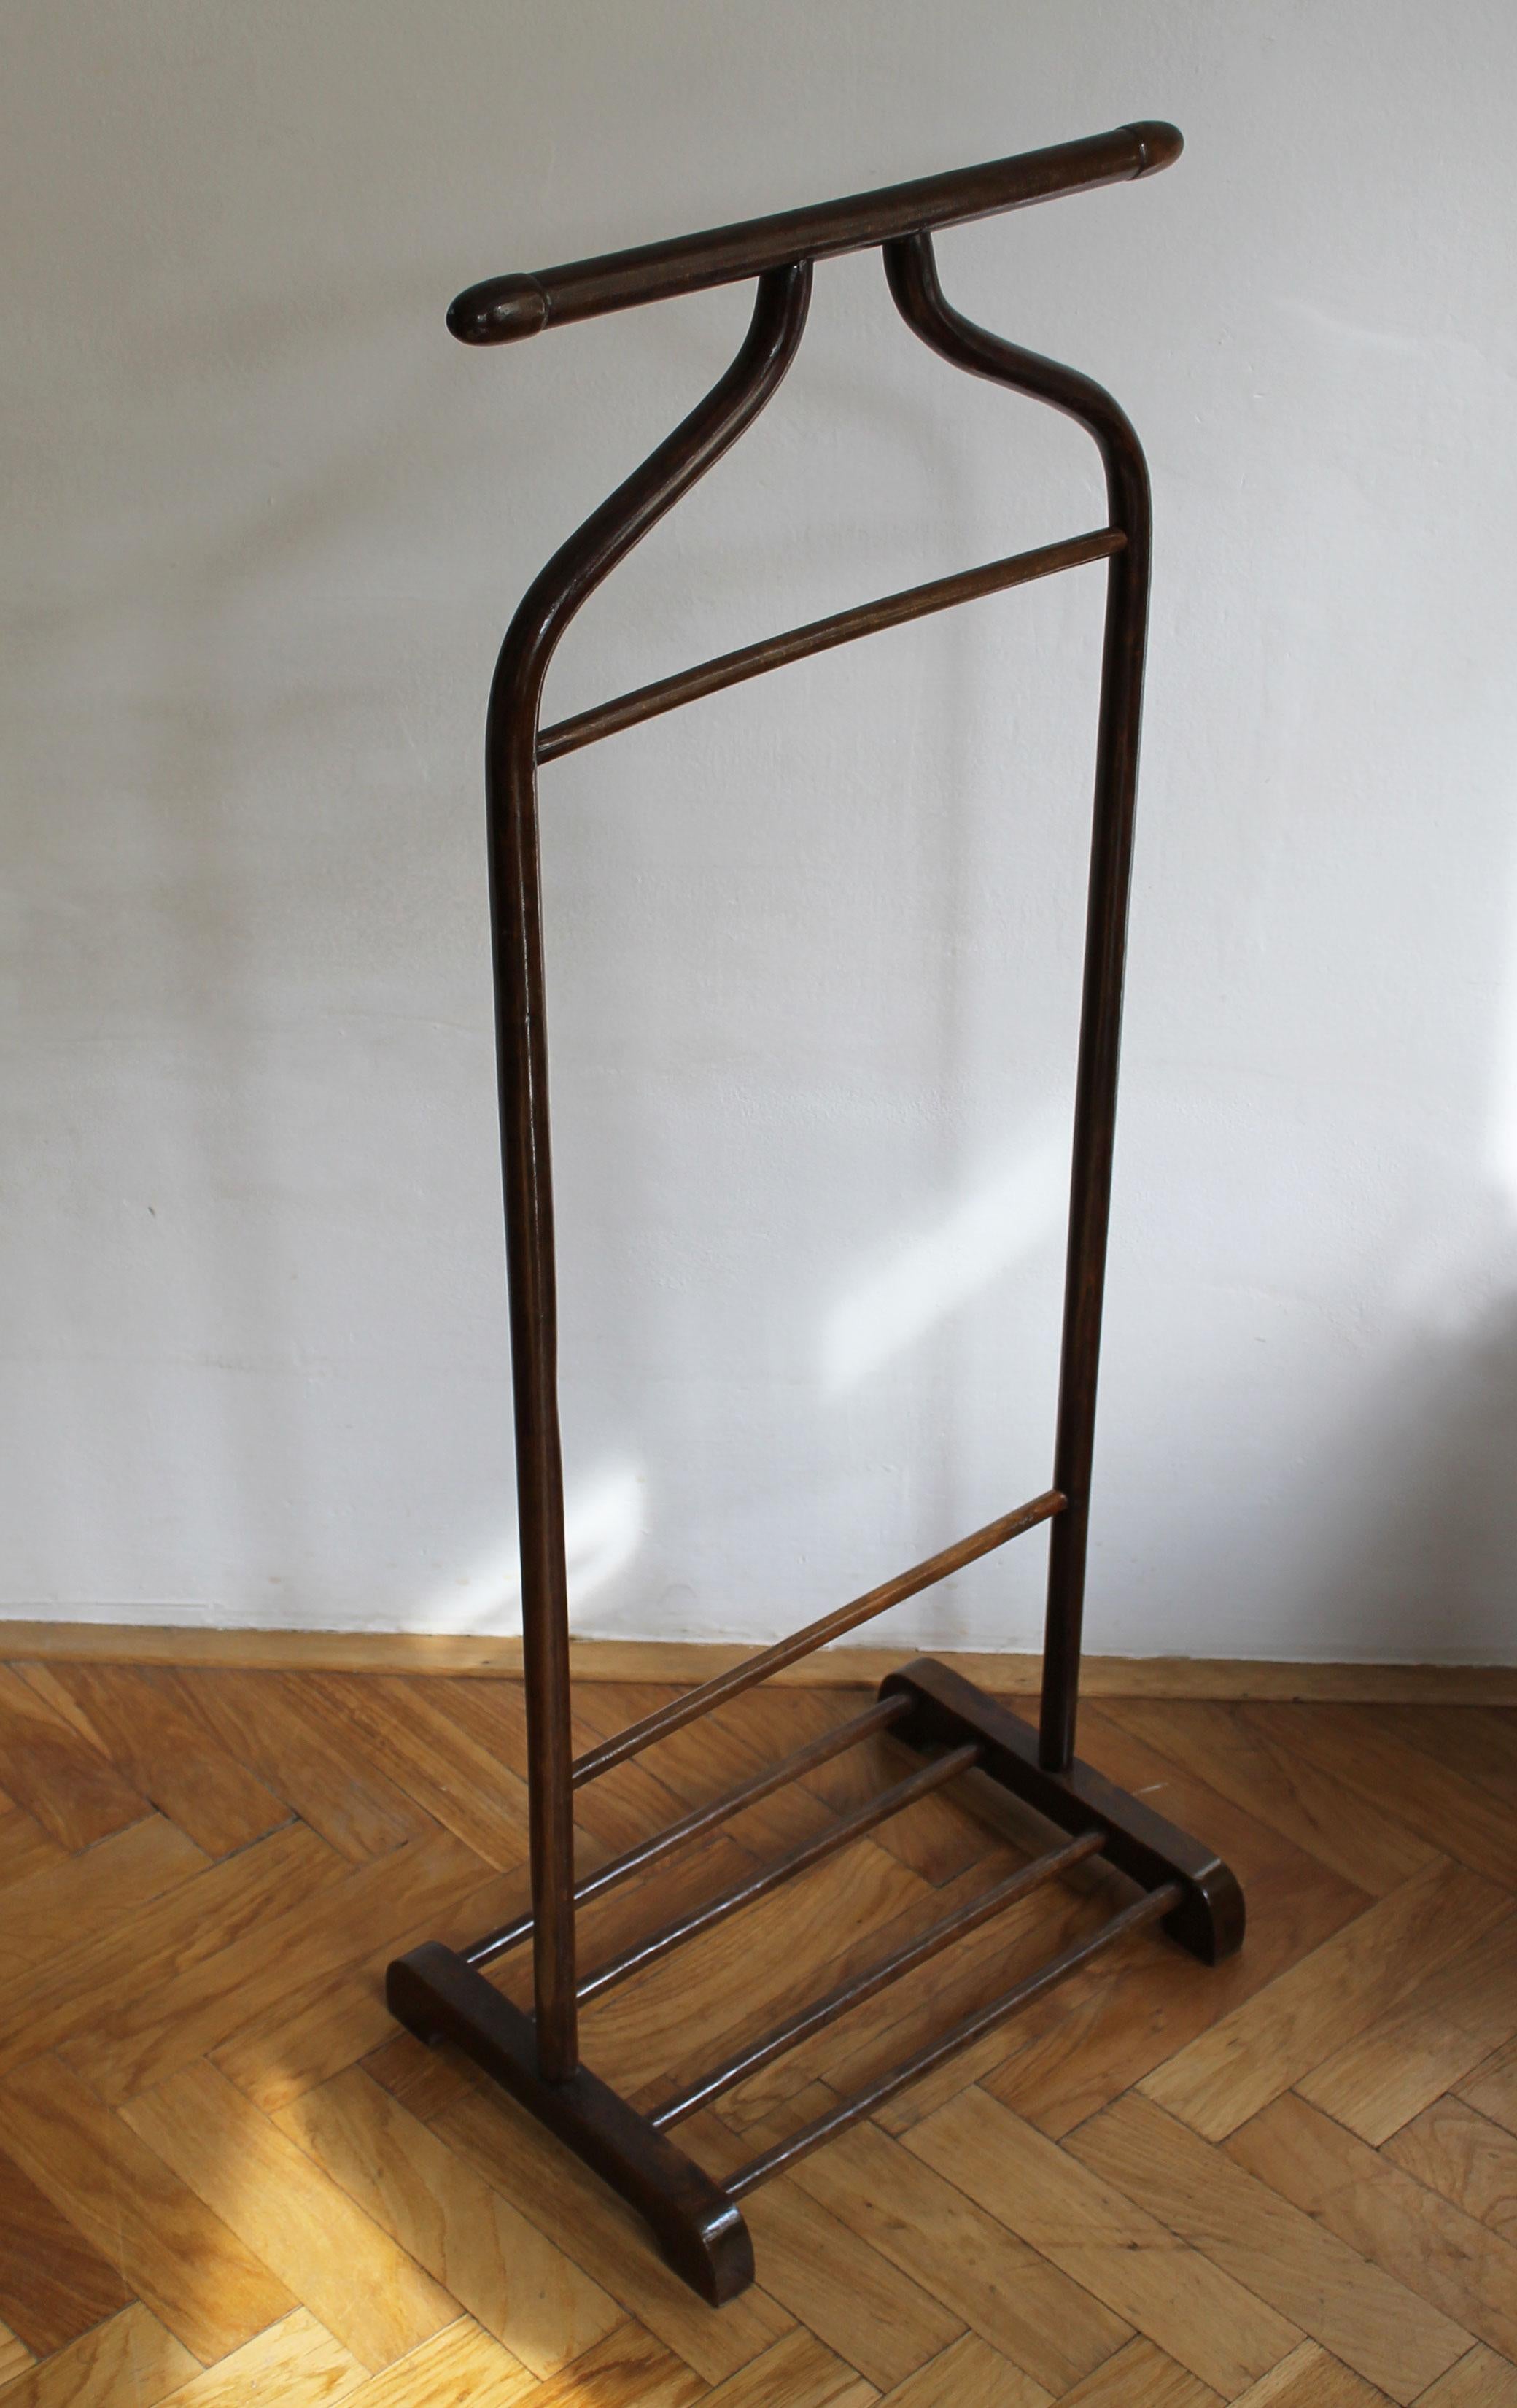 This is an original 1920's Gentleman's Valet Stand that the Thonet Company was selling as Model P133. 

This piece, commonly referred to as the “ Furniture Servant” is made of a dark brown stained beechwood and was designed to comfortably hold a